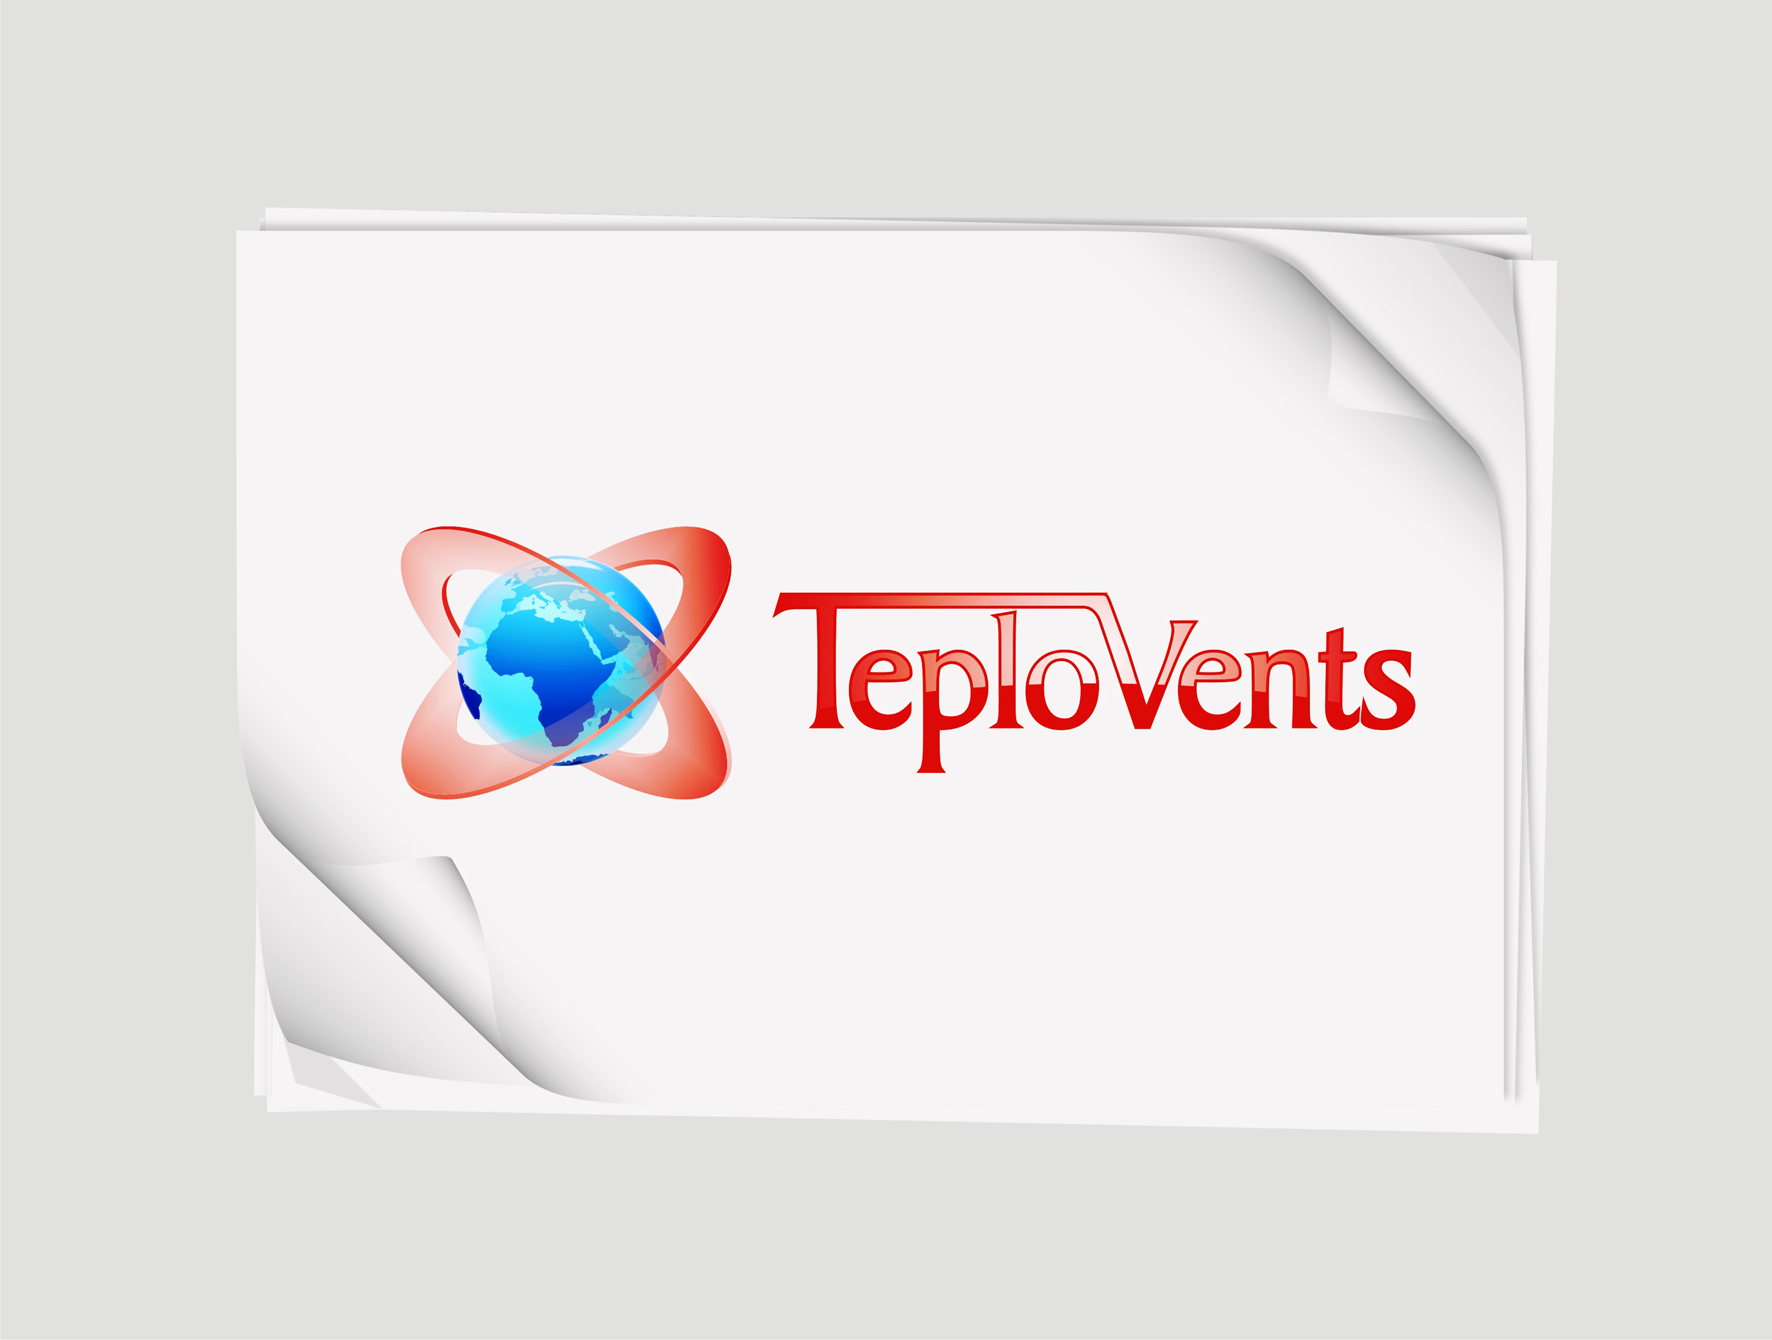 TeploVents